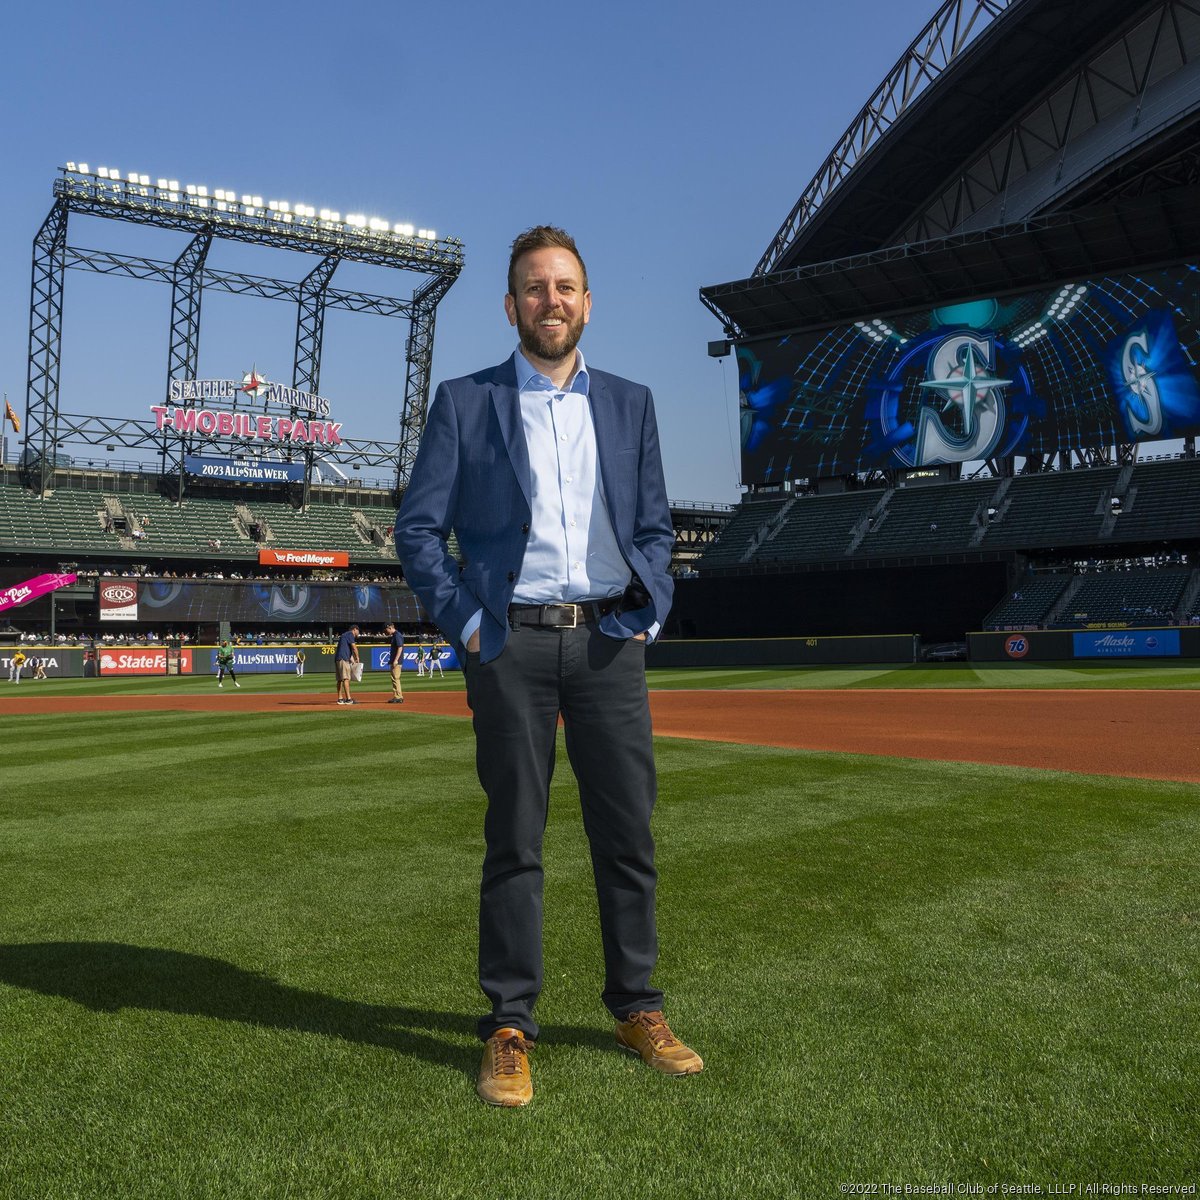 Seattle Mariners GM opens up about his path to the majors